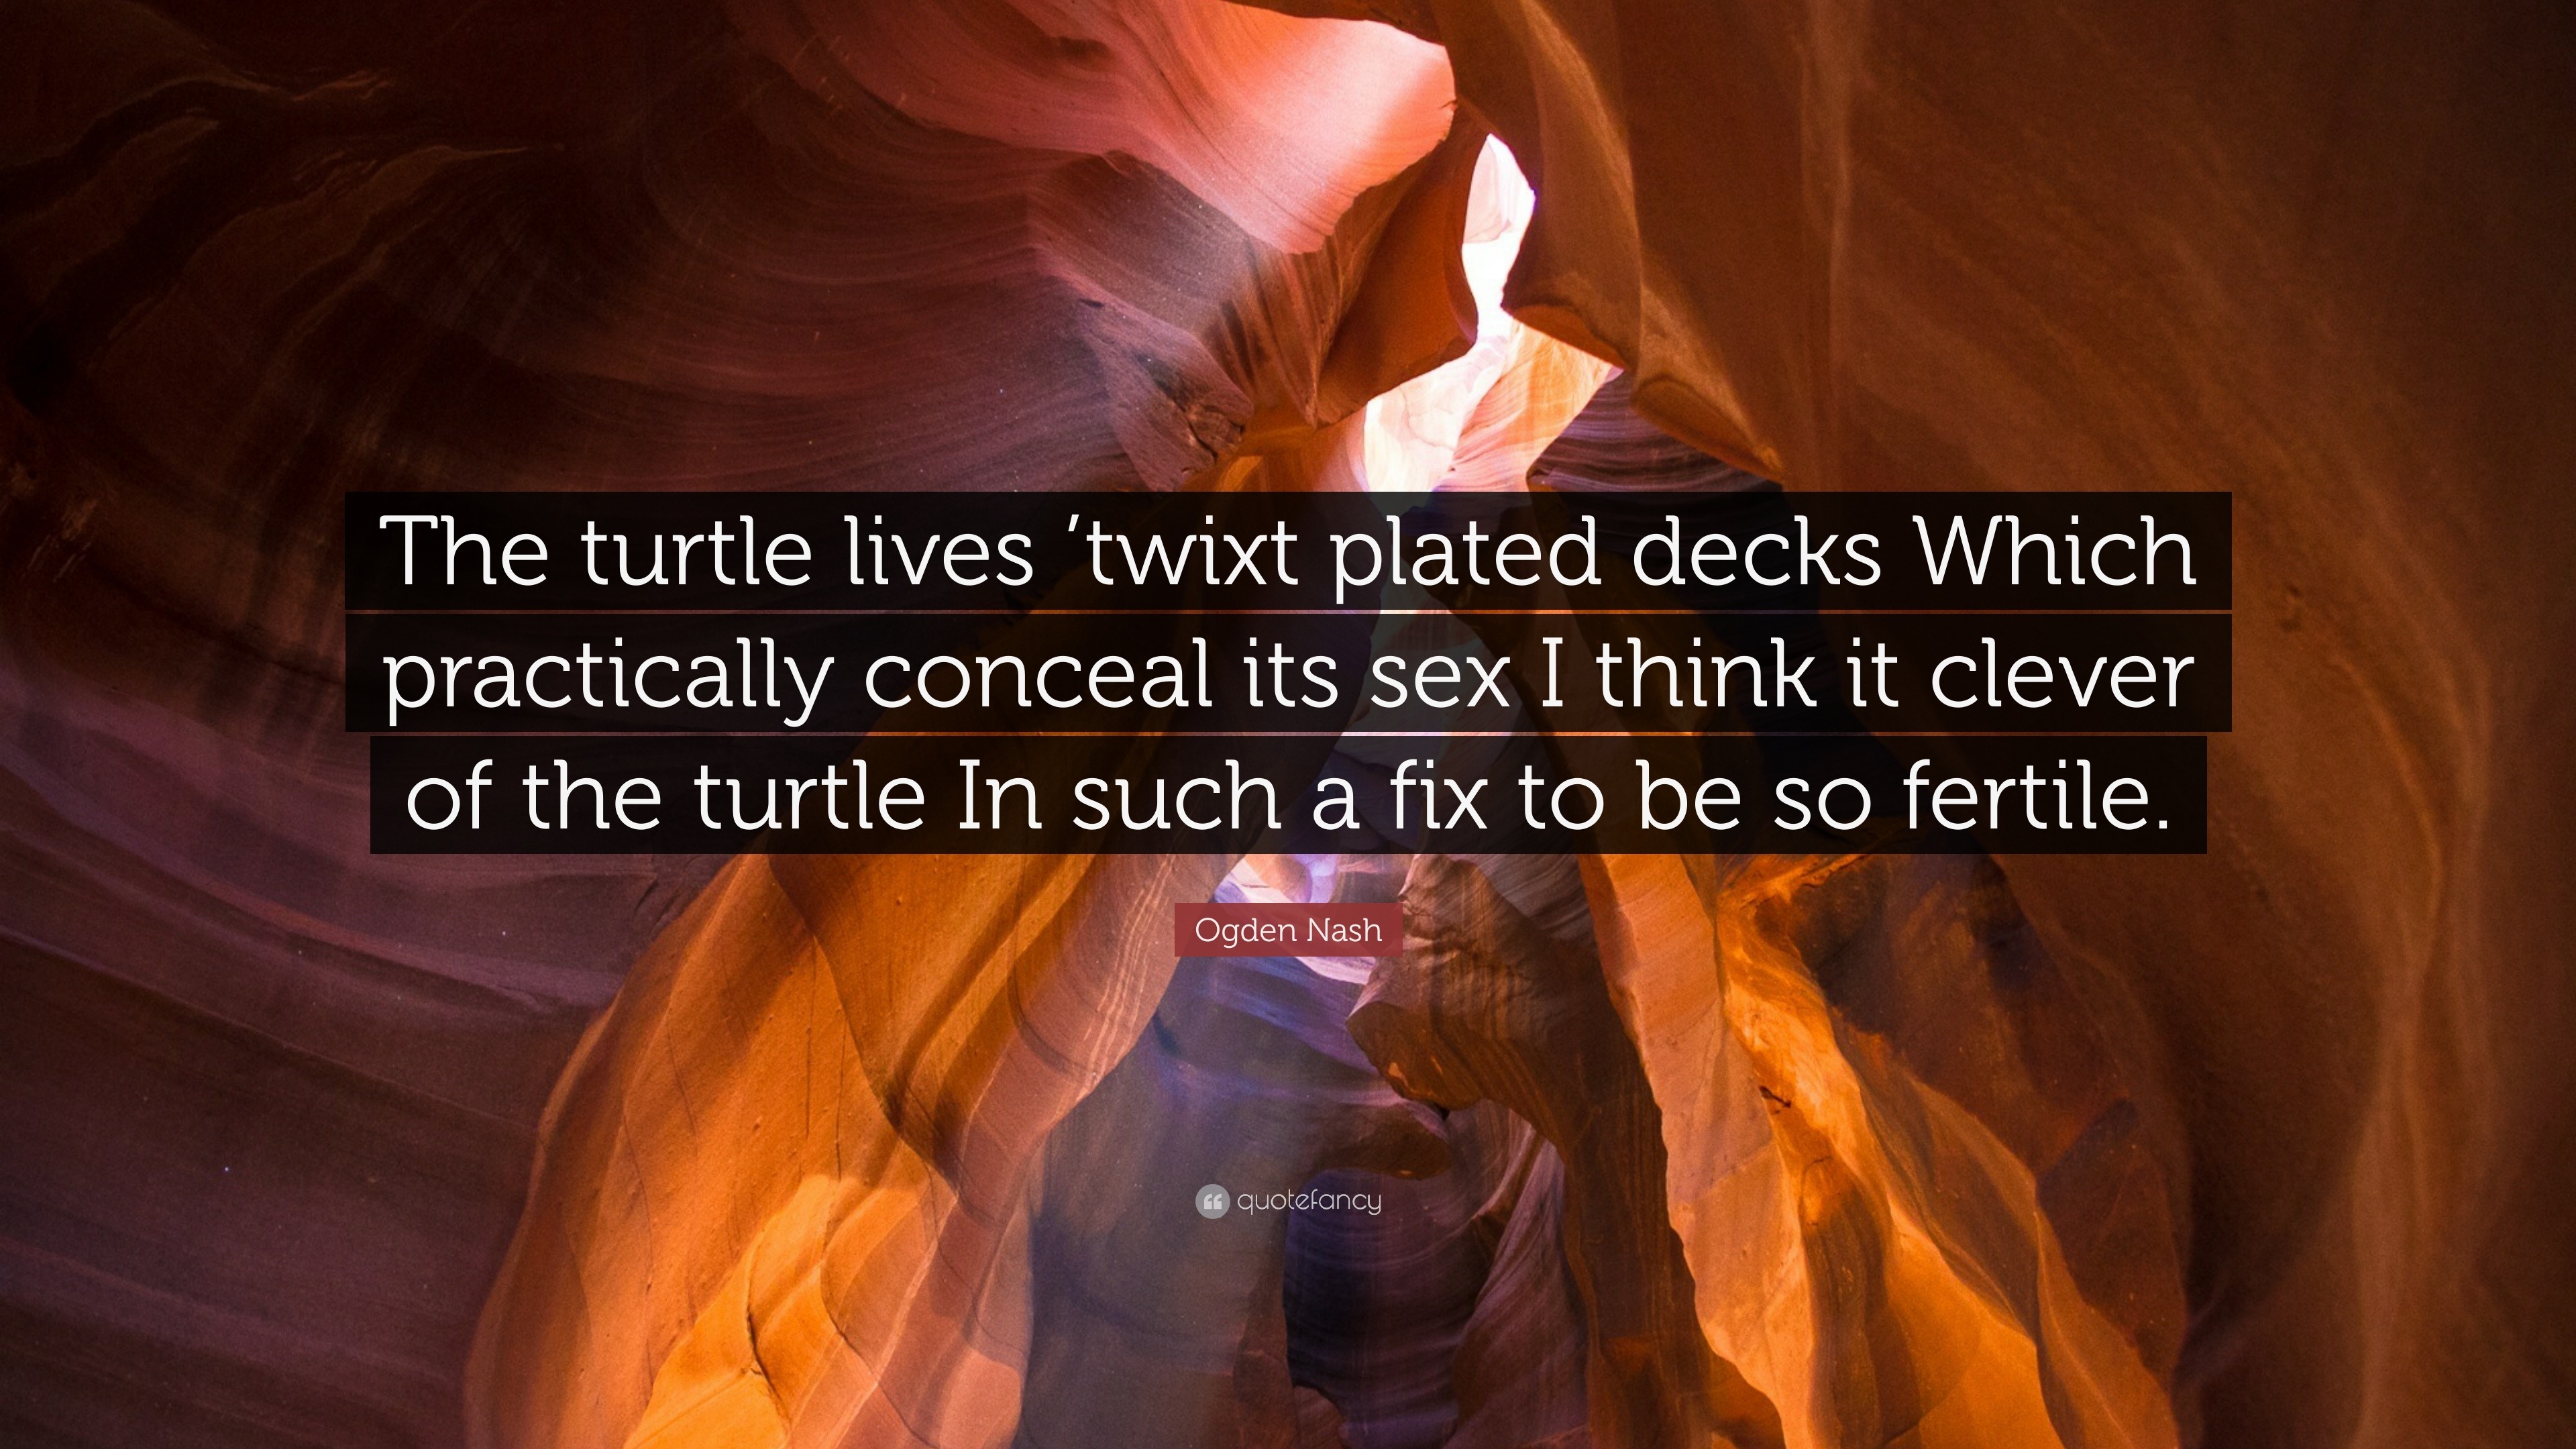 Ogden Nash Quote “the Turtle Lives Twixt Plated Decks Which Practically Conceal Its Sex I